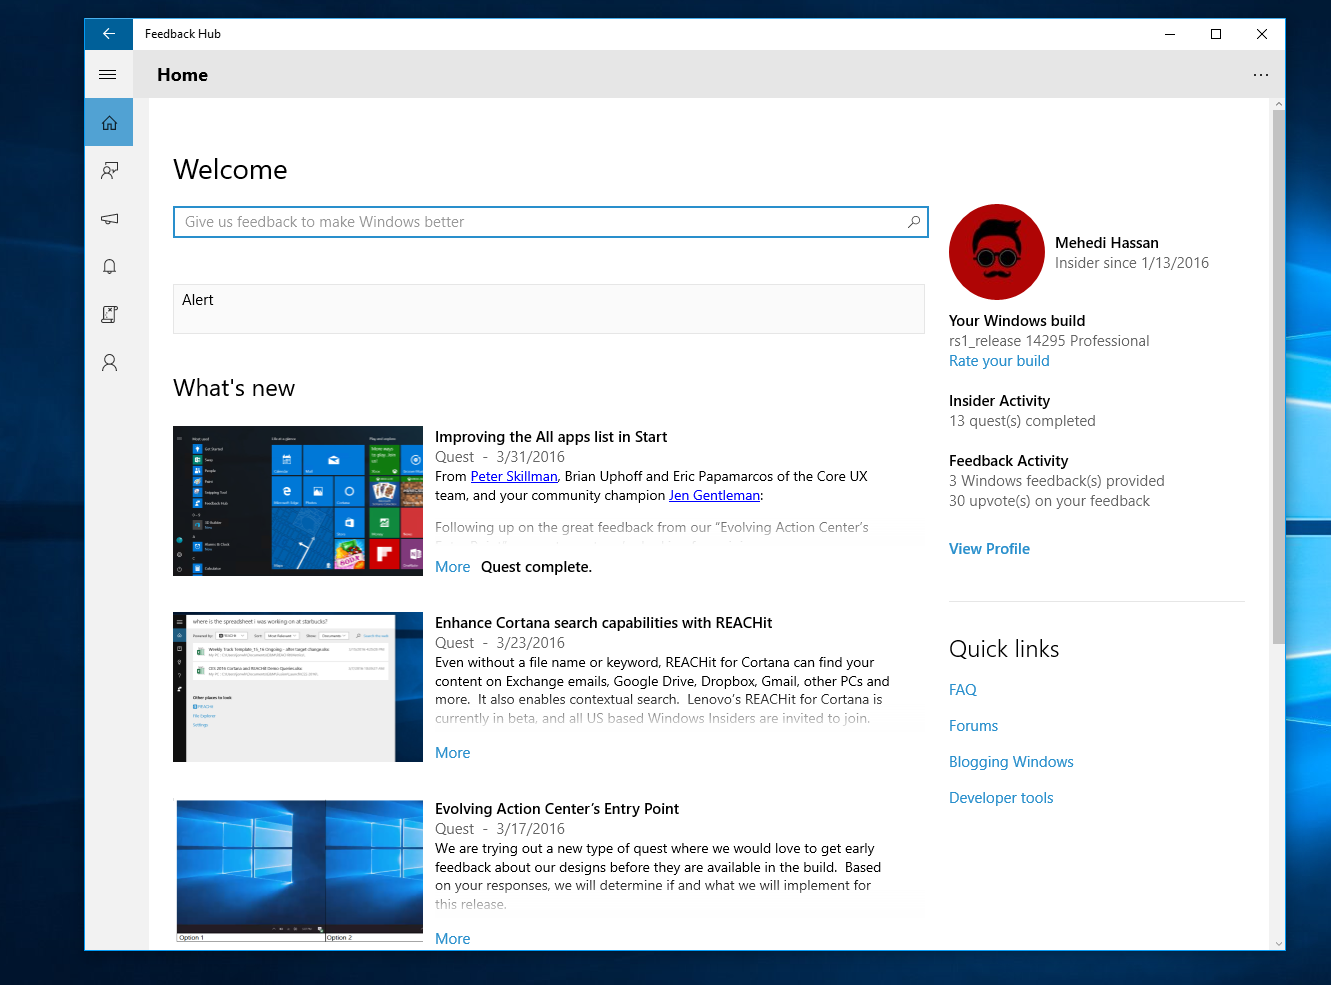 Microsoft updates Feedback Hub with “Language Community” app integration and more